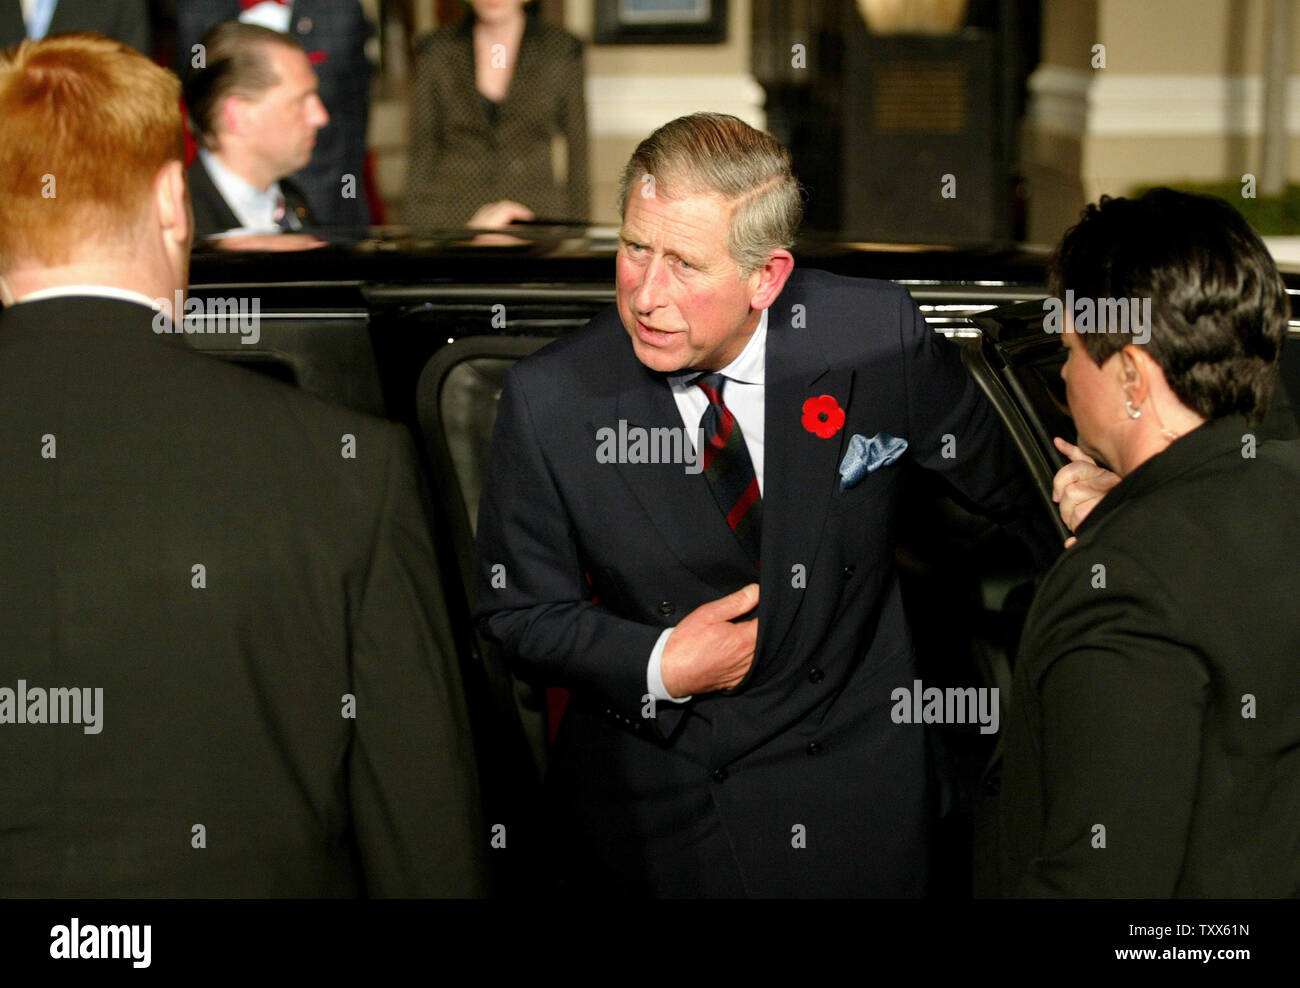 Prince Charles, The Prince of Wales, and his wife Camilla, The Duchess of Cornwall arrive for a performance of Beach Blanket Babylon at Club Fugazi in San Francisco, California on November 6, 2005.   (UPI Photo/Ken James) Stock Photo